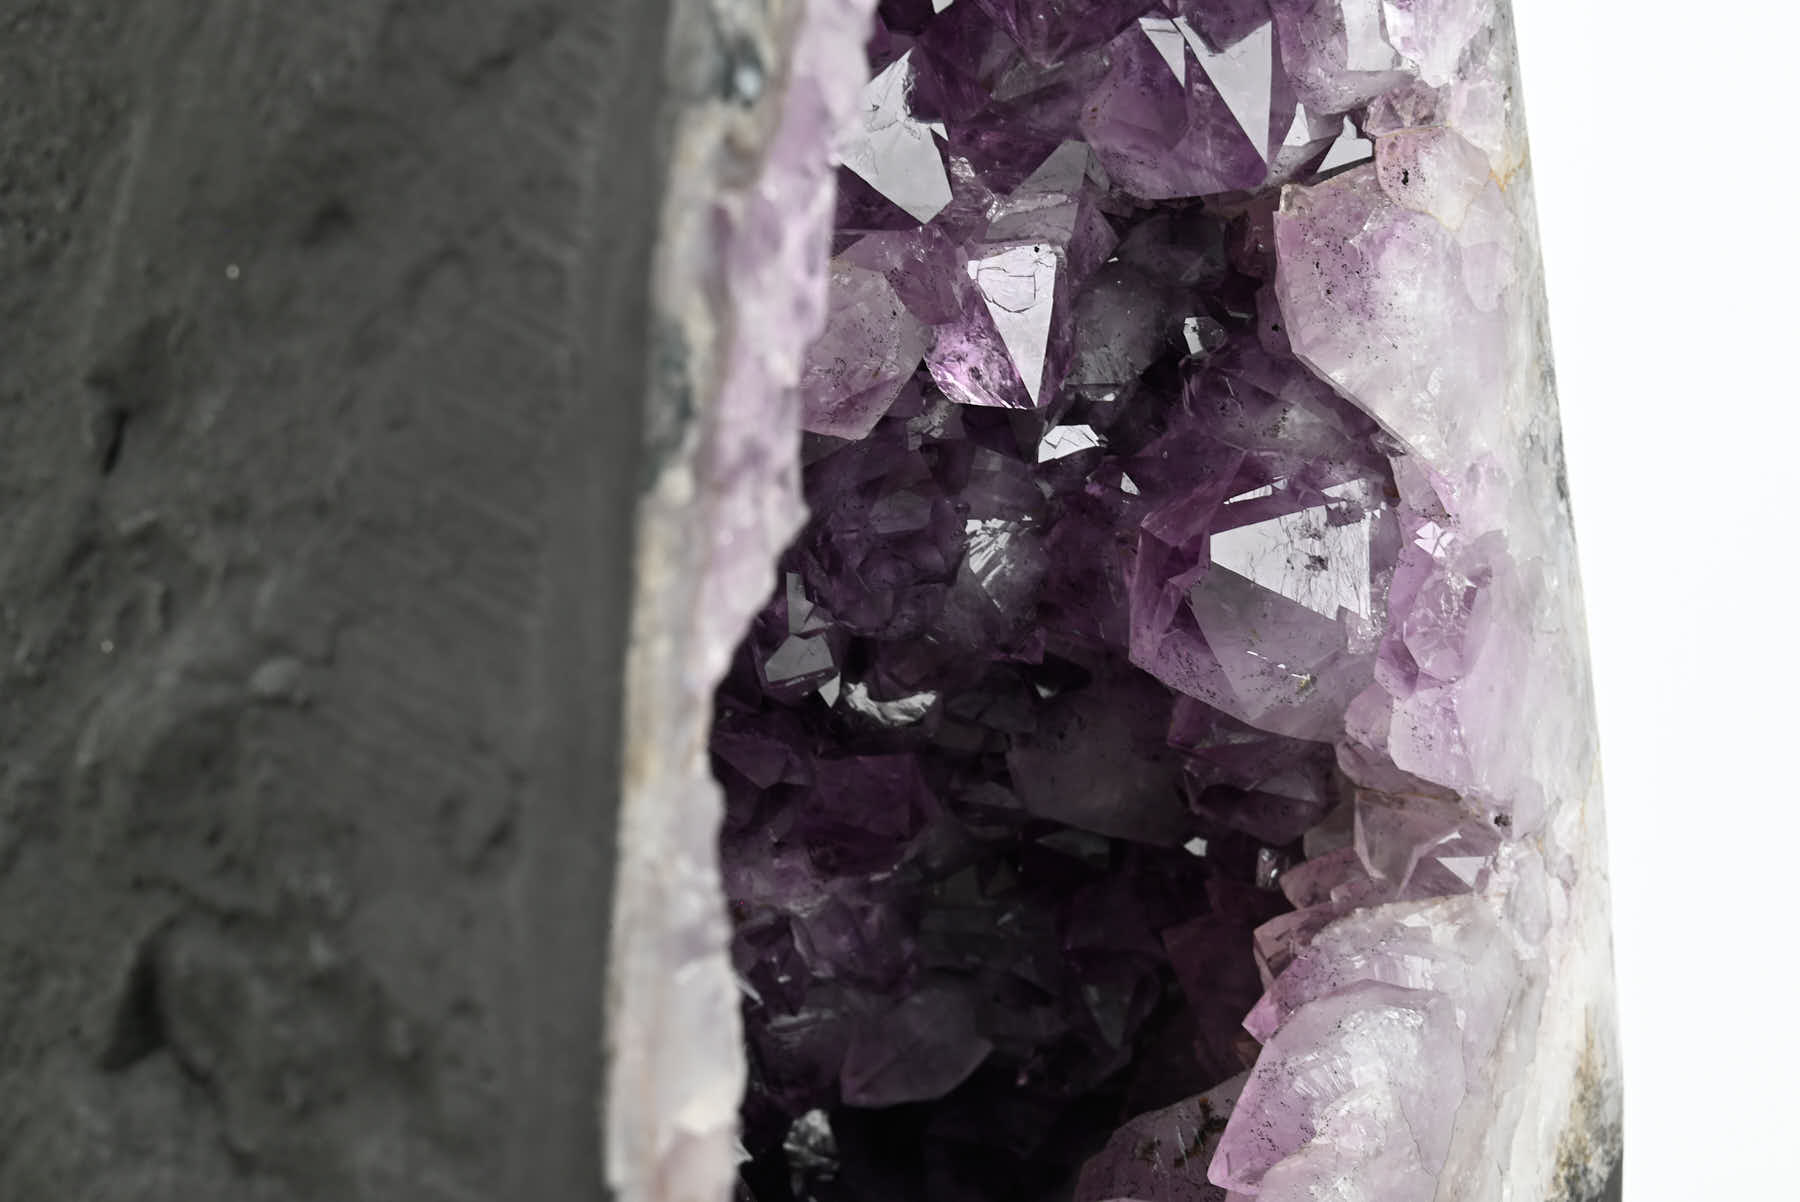 Extra Quality Amethyst Cathedral - 9.56kg, 29cm tall - #CAAMET-10060